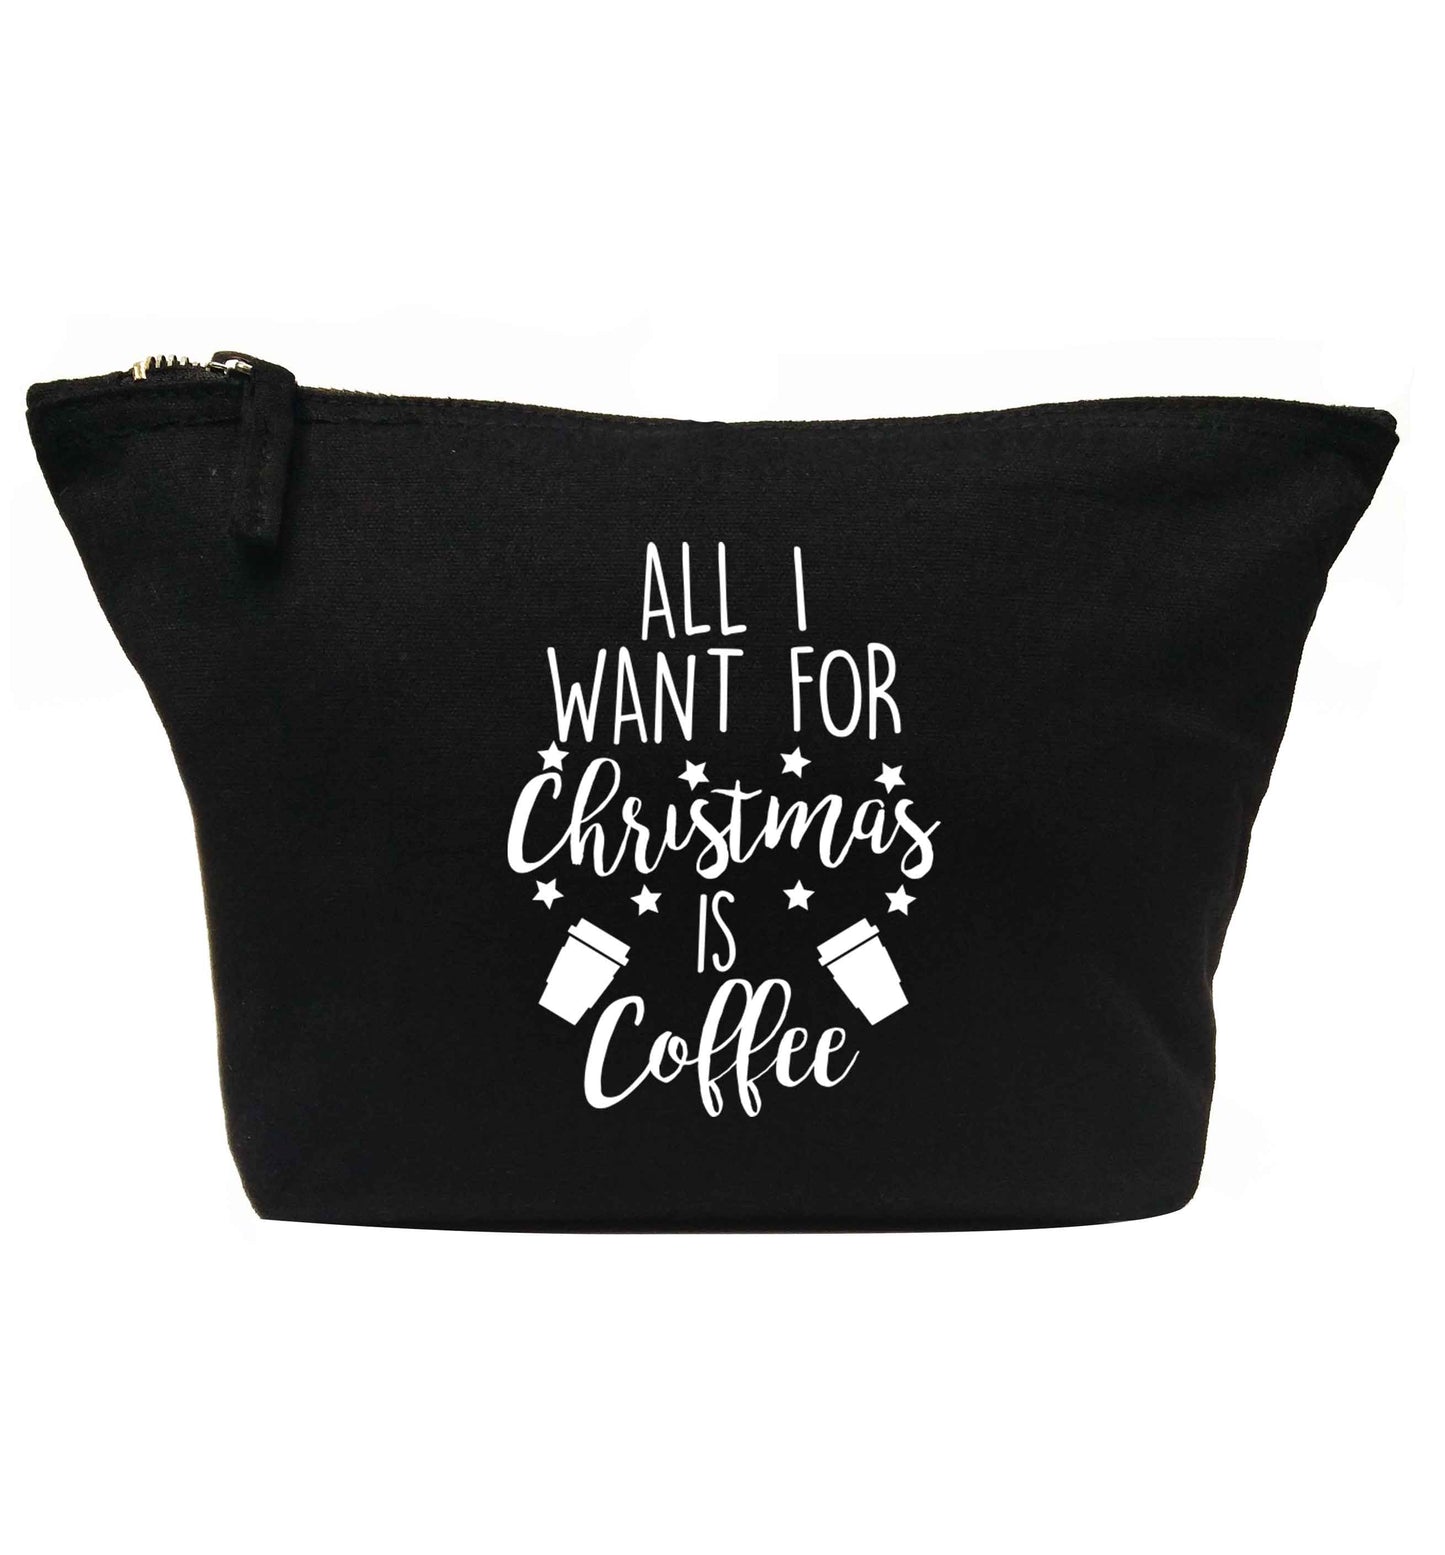 All I want for Christmas is coffee | makeup / wash bag